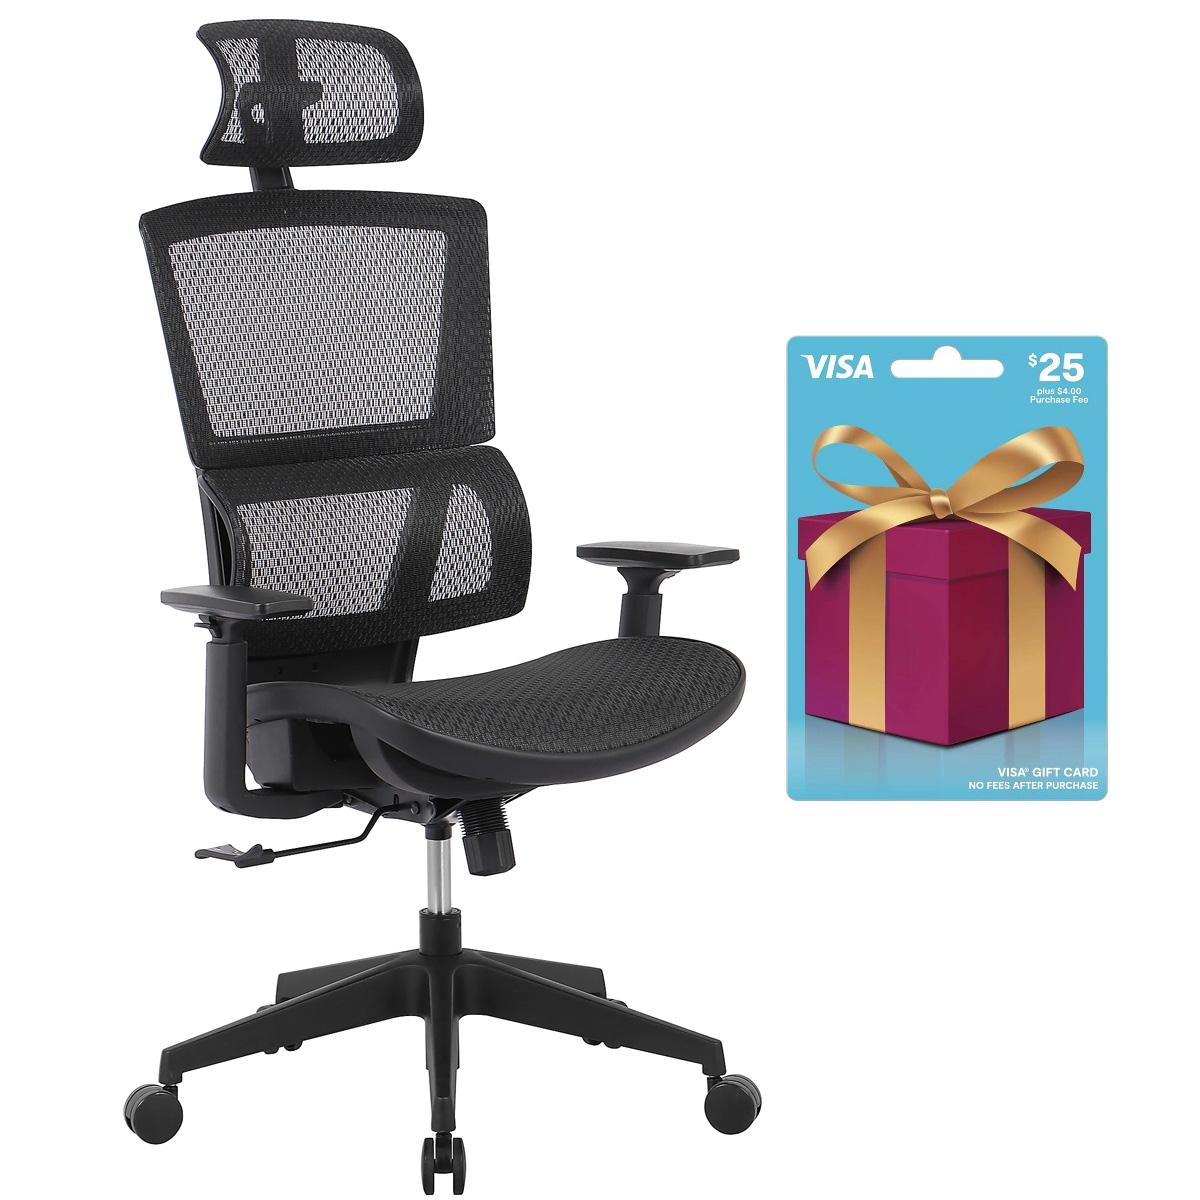 Realspace Radano Mesh Executive Office Chair with $25 GC for $119.99 Shipped